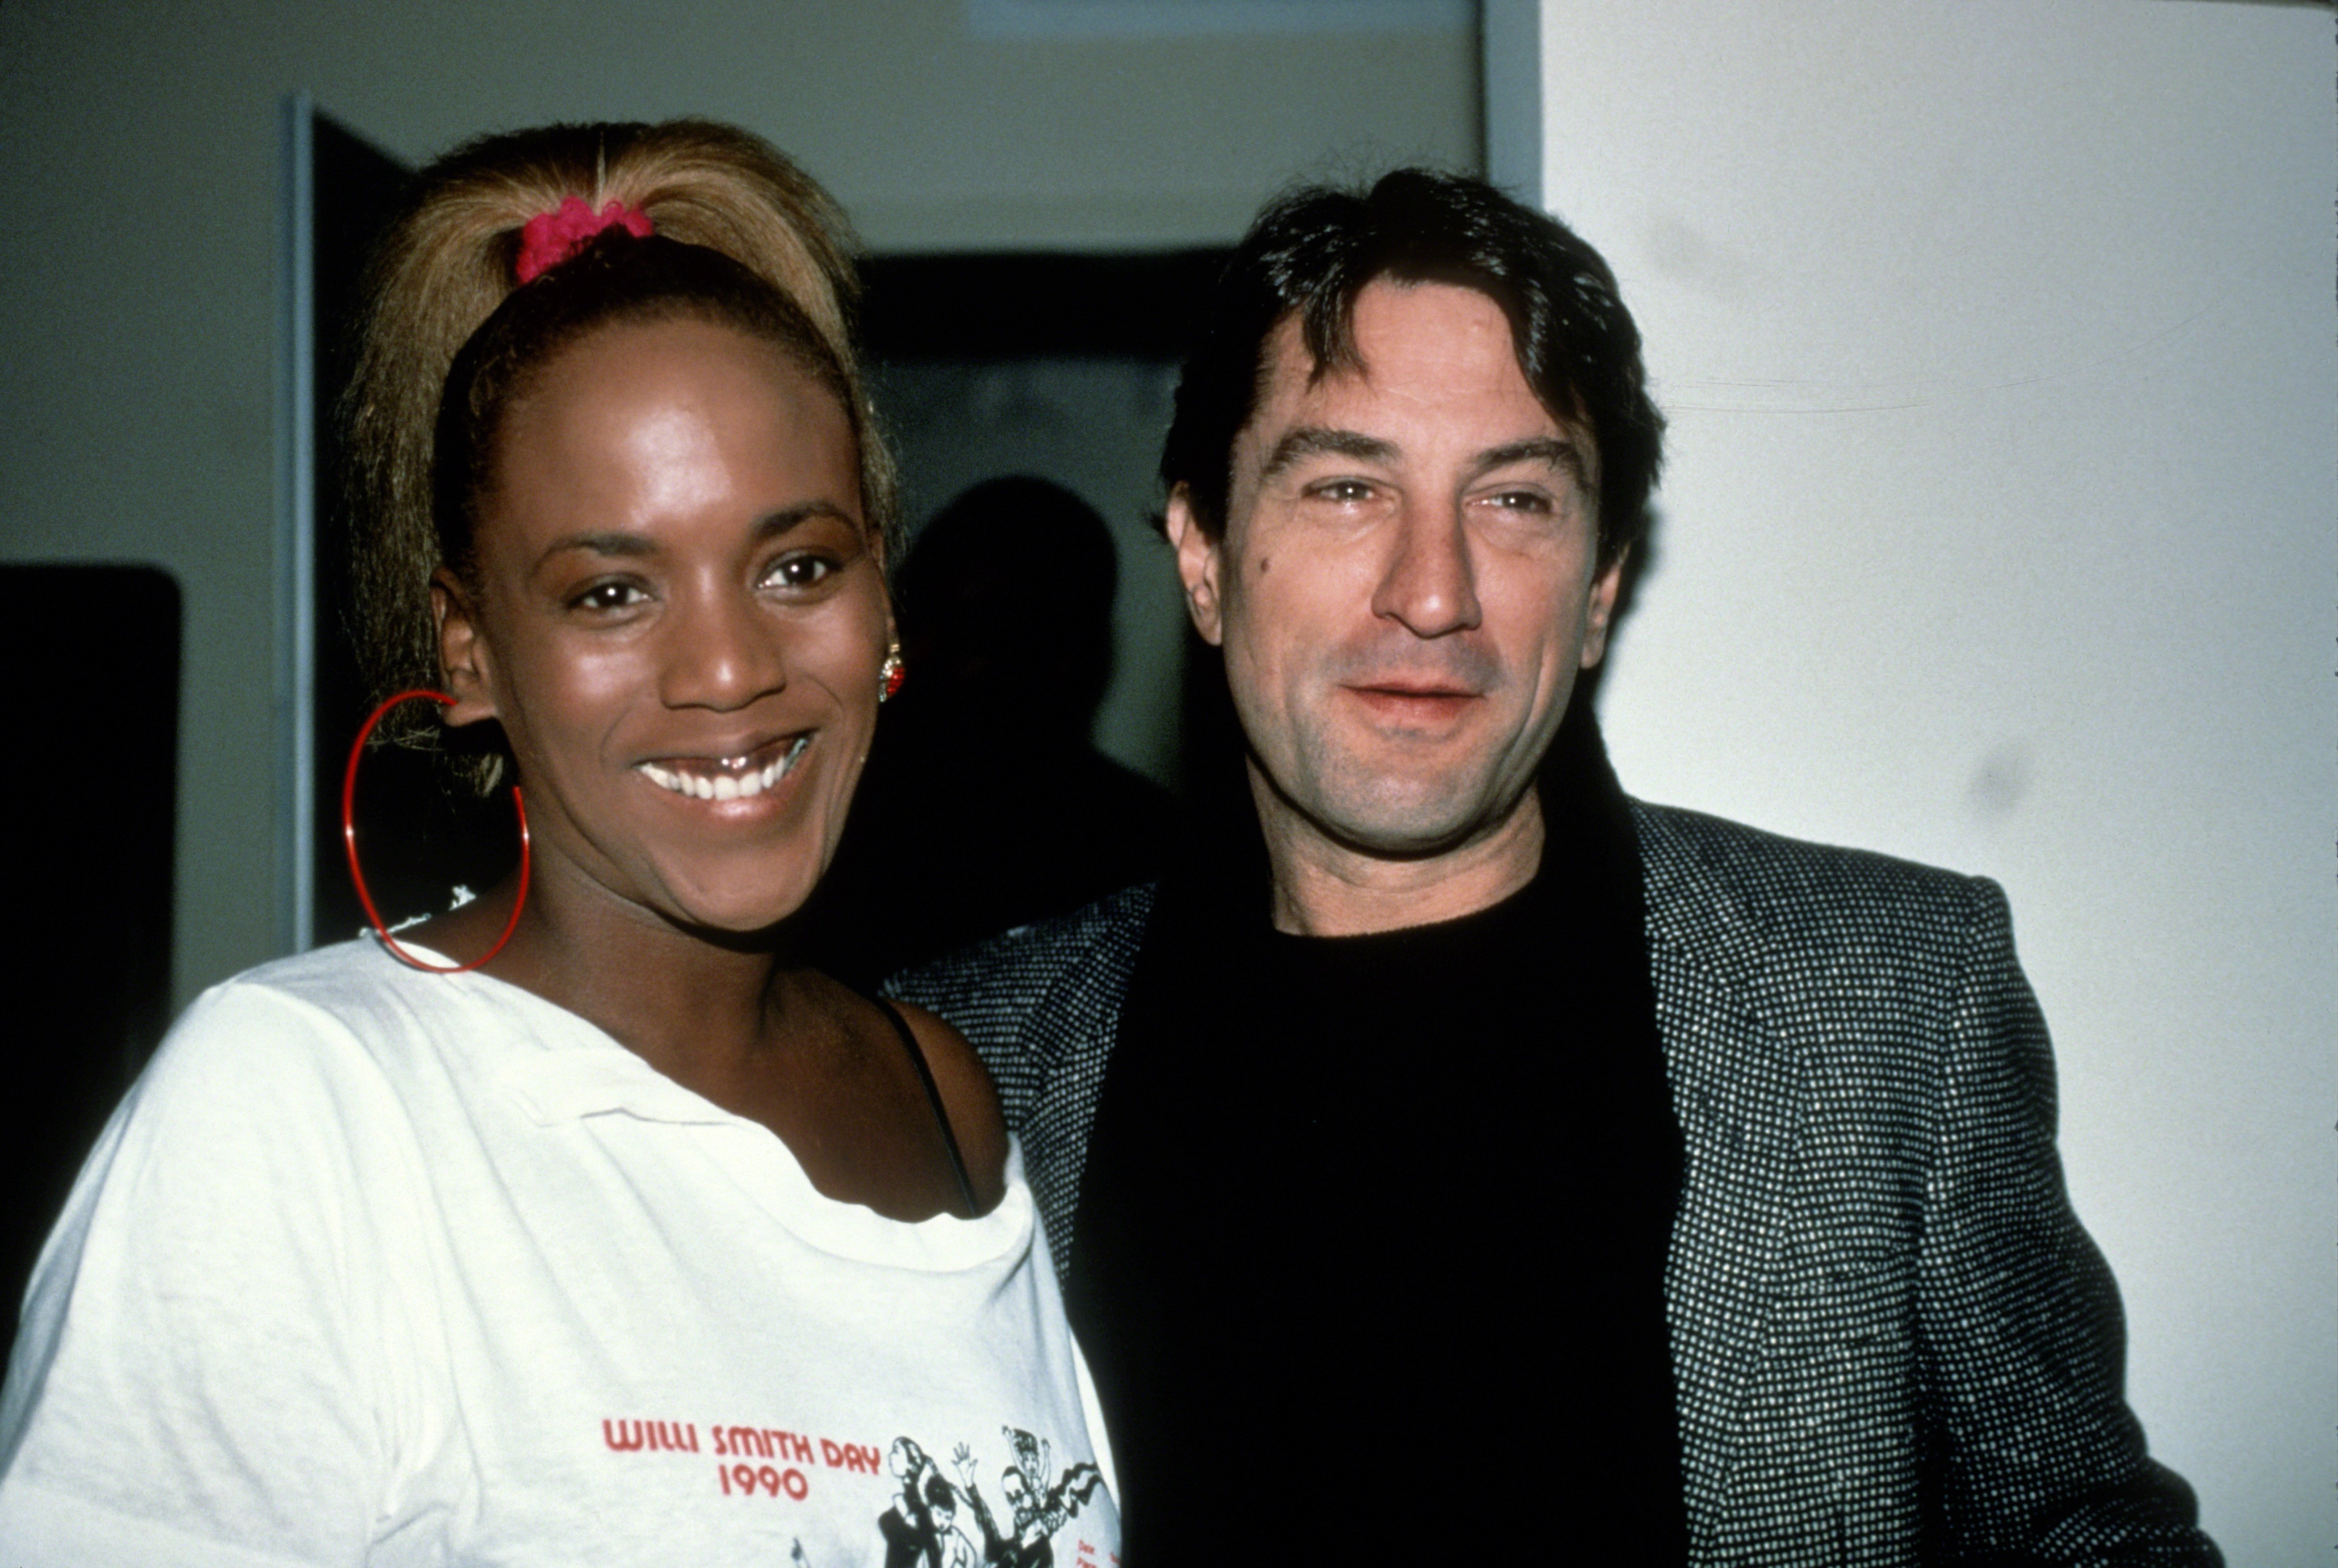 Robert De Niro pictured with longtime girlfriend actress Toukie Smith sometime in 1990 in New York City. / Source: Getty Images